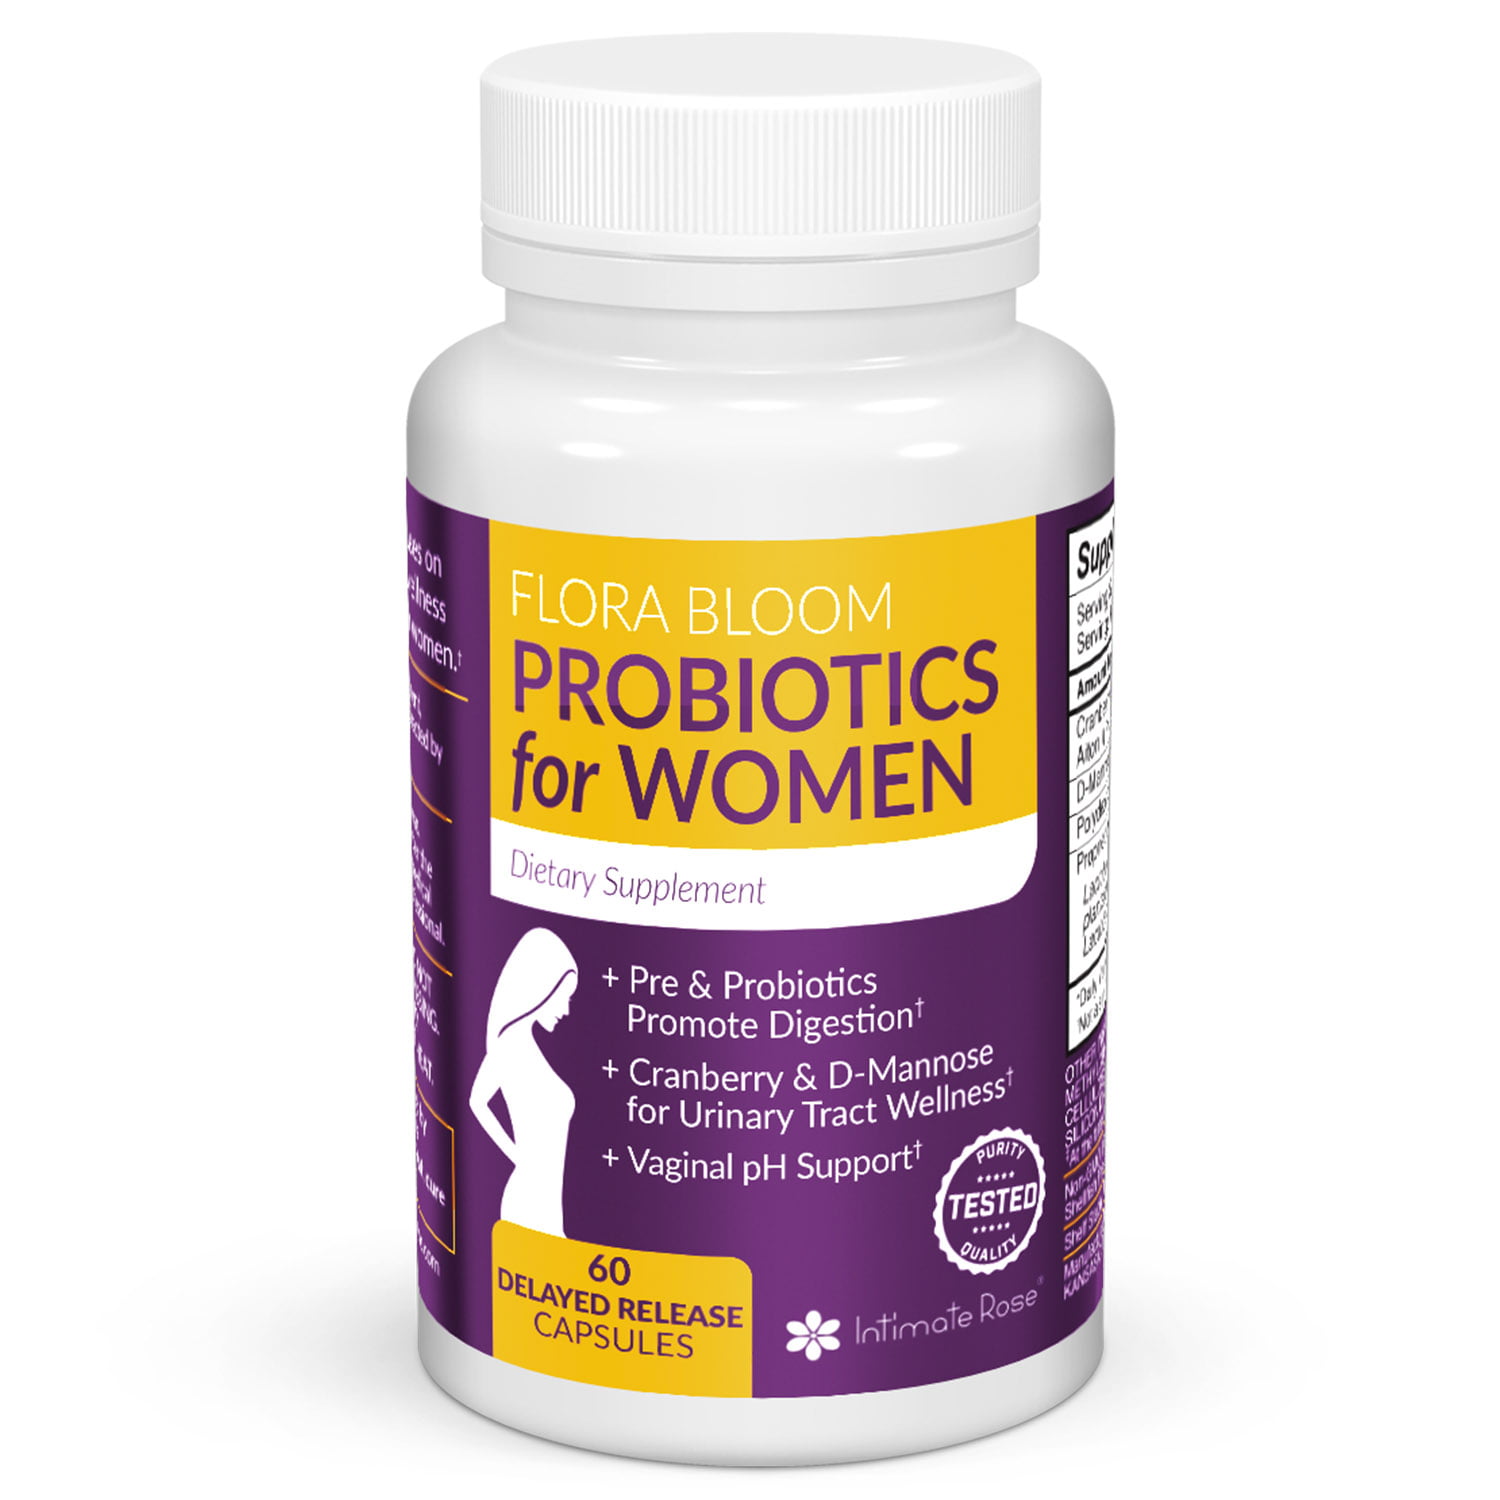 What Are Probiotics? Probiotic Supplements, Foods, Uses ...